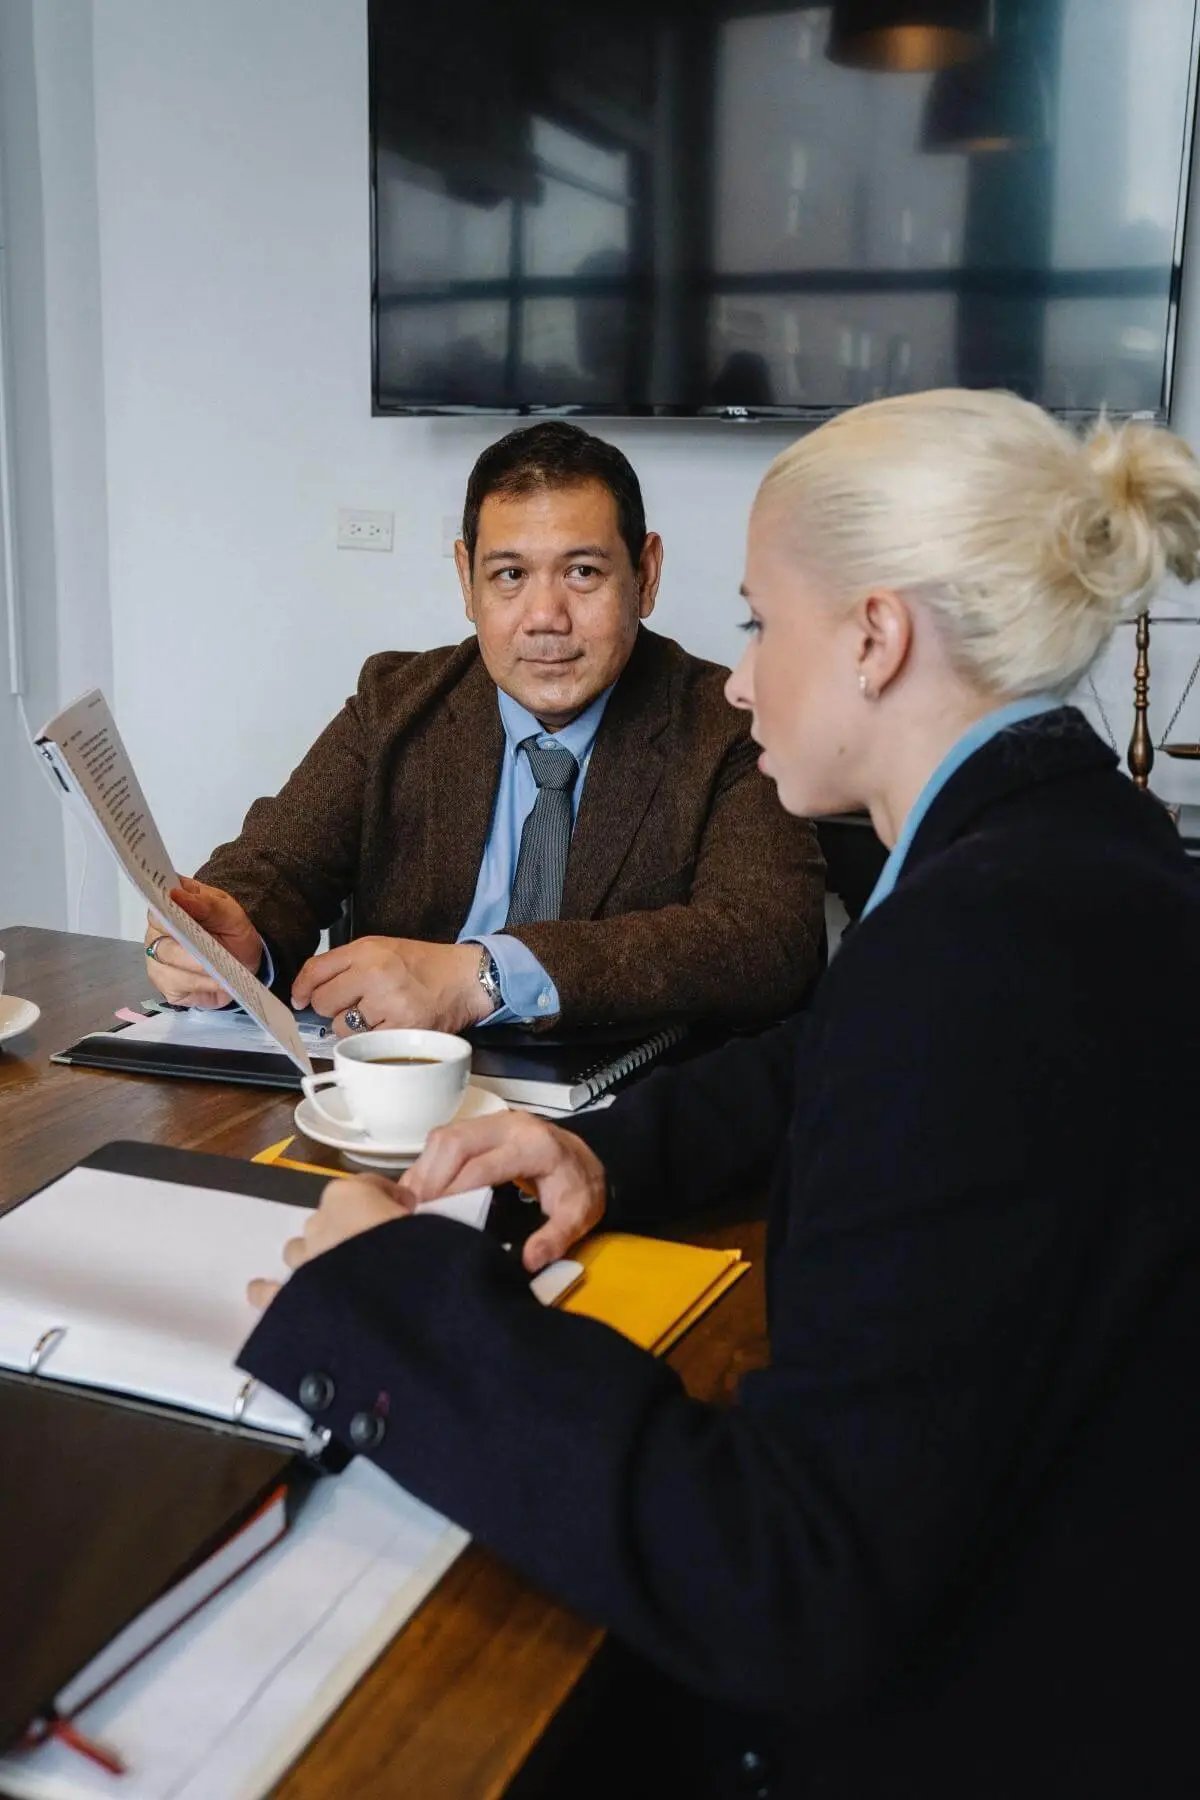 A businessman and businesswoman are sitting at a desk looking at important business documents together